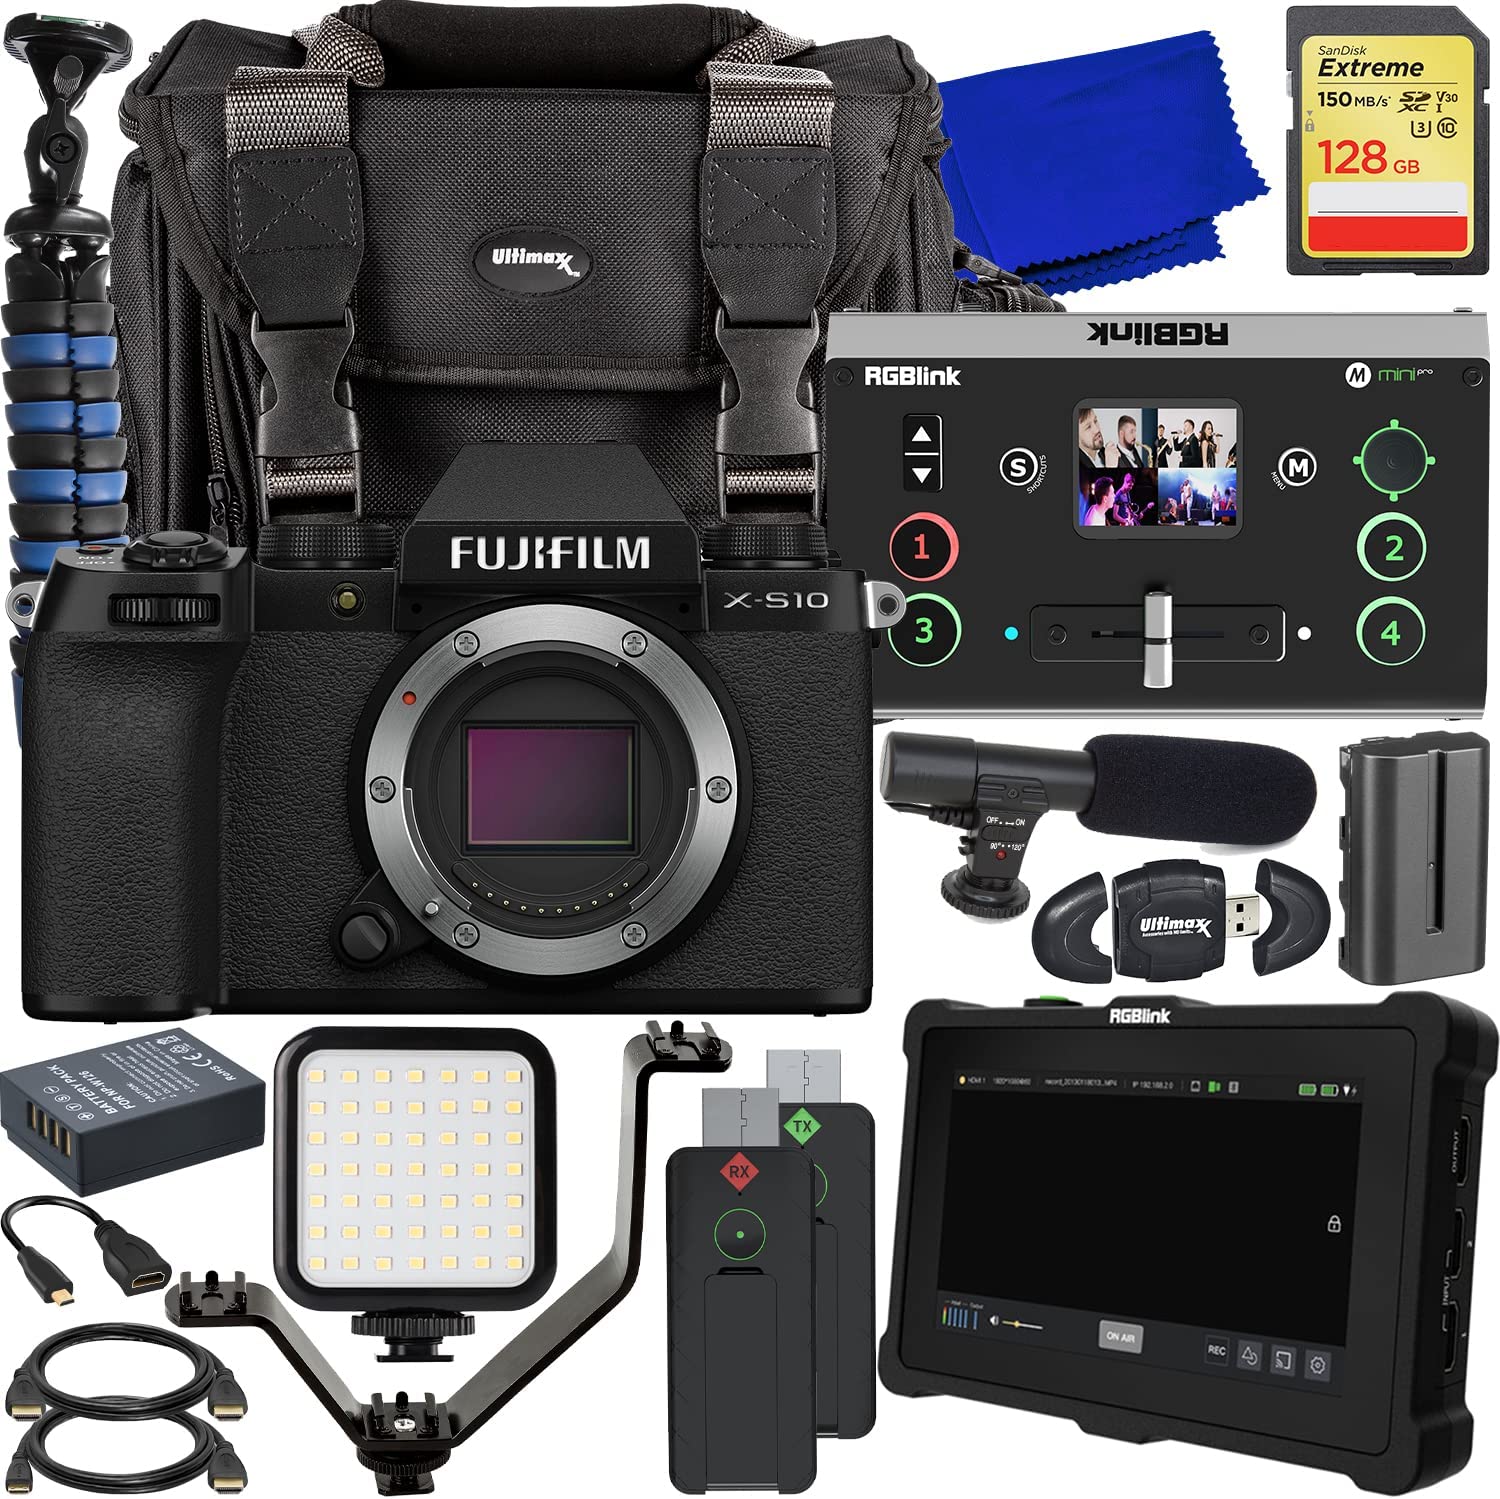 Streaming/Vlogging Complete Bundle + RGBlink Mini Pro, Tao 1pro, Ask Nano Starter Set + FUJIFILM X-S10 Mirrorless Camera (Body Only), SanDisk 128GB Extreme SDXC & Much More (35pc Bundle) Brand: Ultimaxx